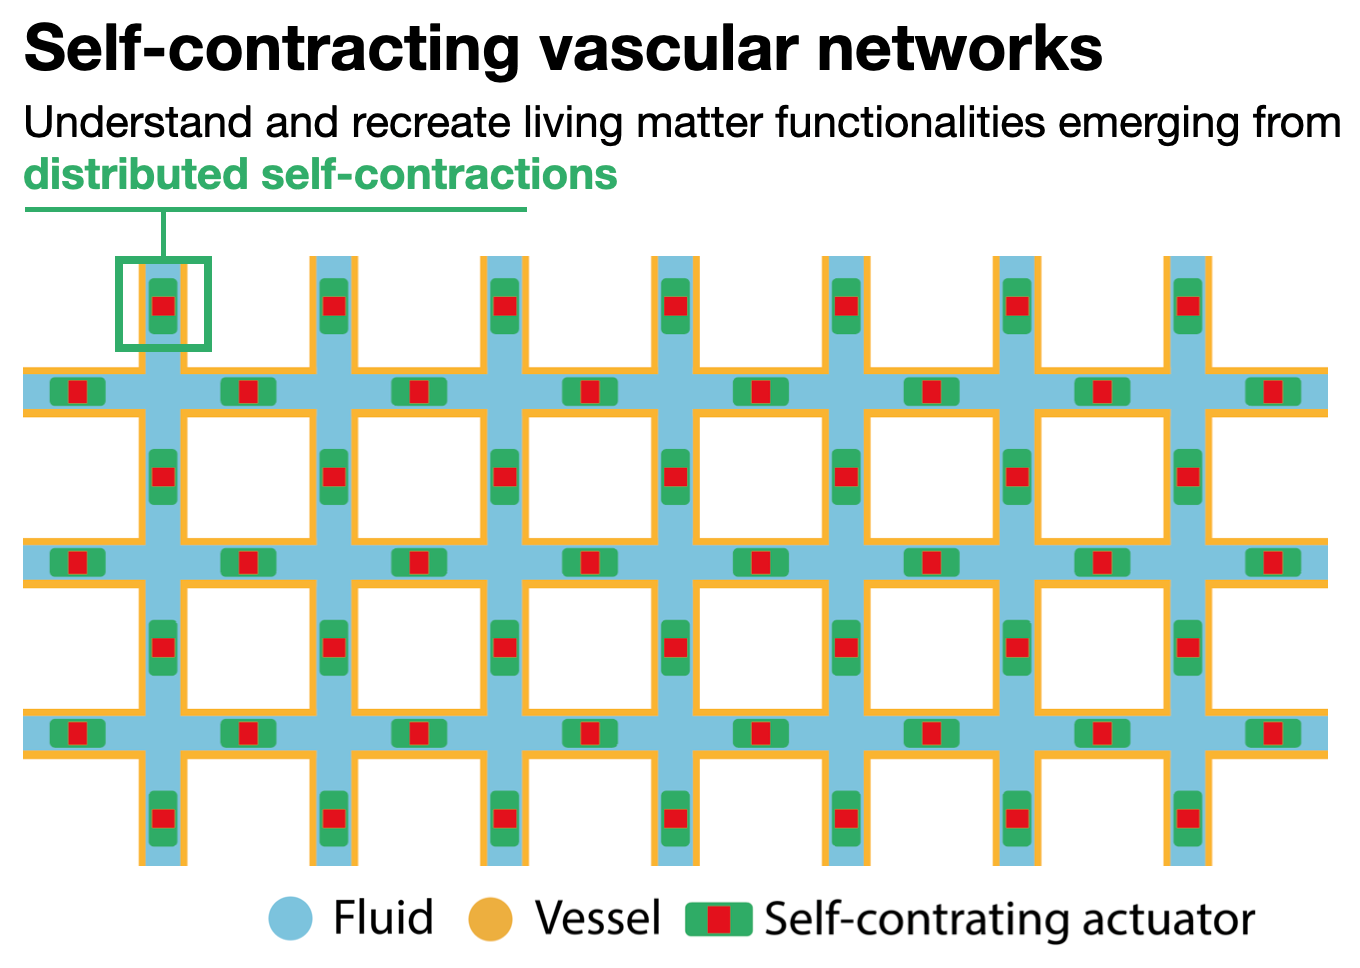 Self-contracting vascular networks